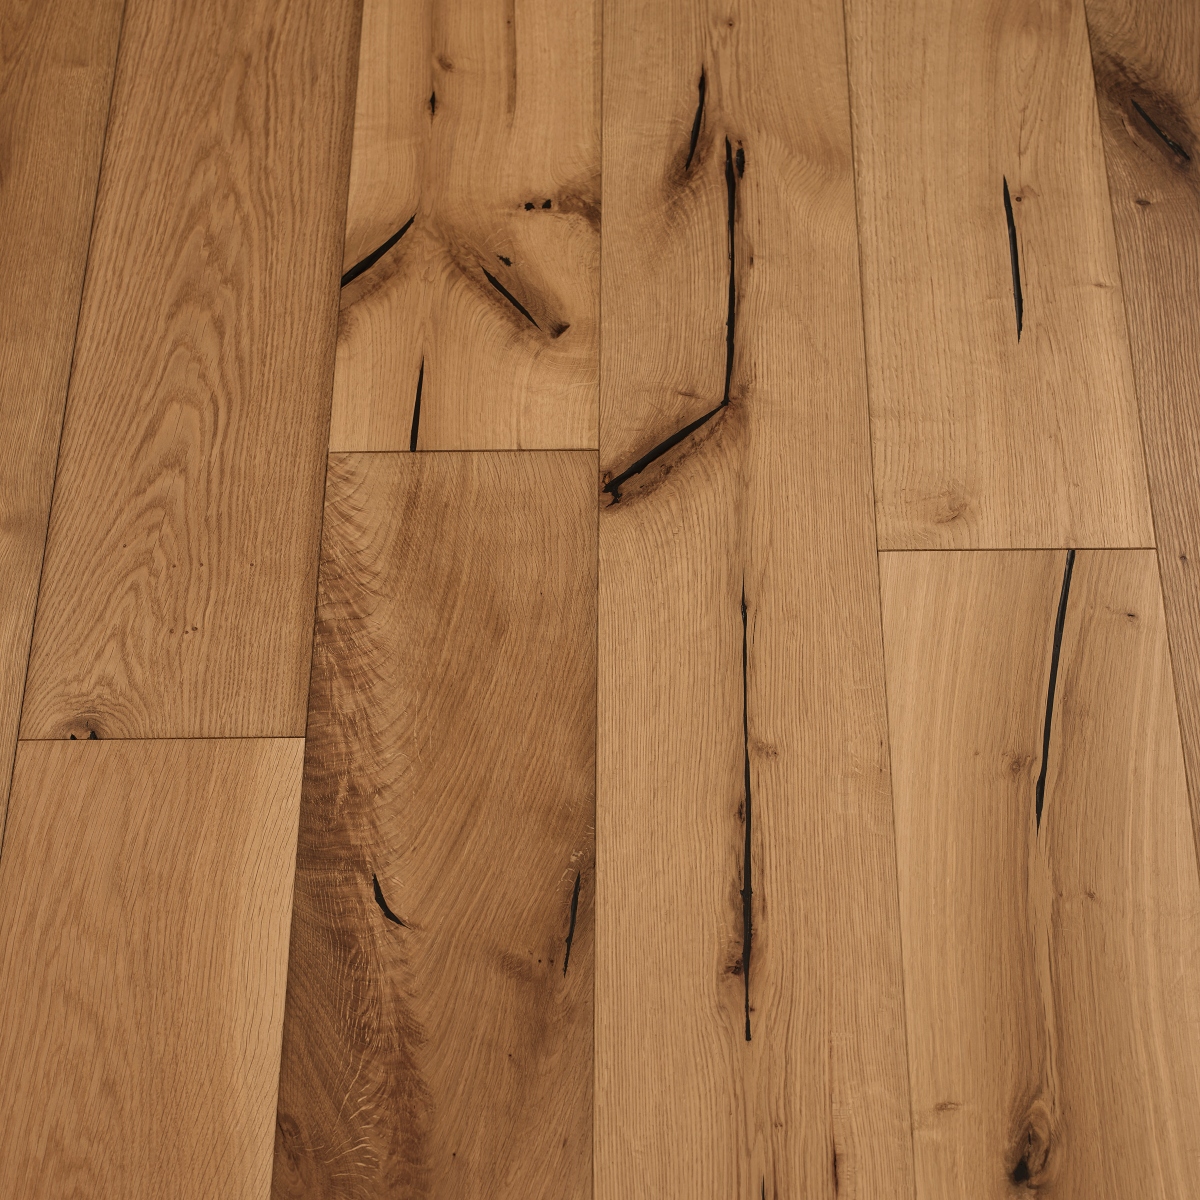 Distressed Chestnut Flooring: An image showcasing distressed chestnut flooring, featuring a deep brown colour with reddish undertones, offering a luxurious and timeless appeal.